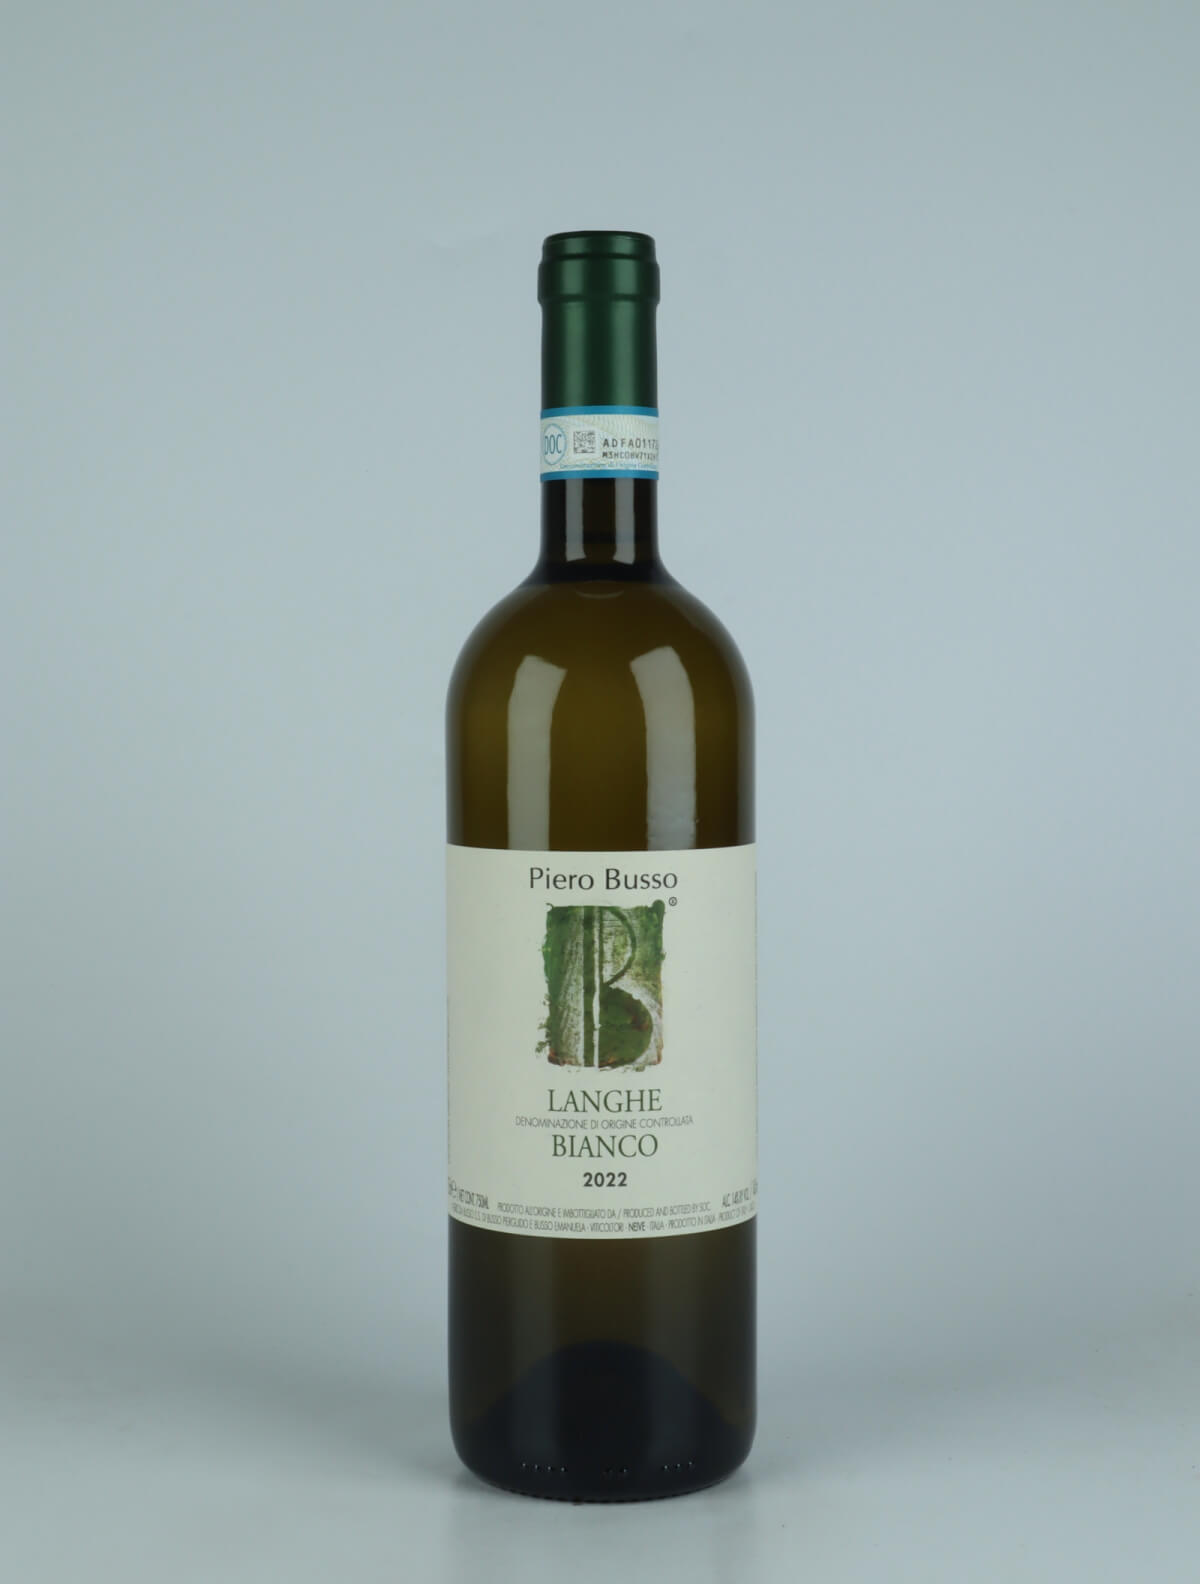 A bottle 2022 Langhe Chardonnay White wine from Piero Busso, Piedmont in Italy